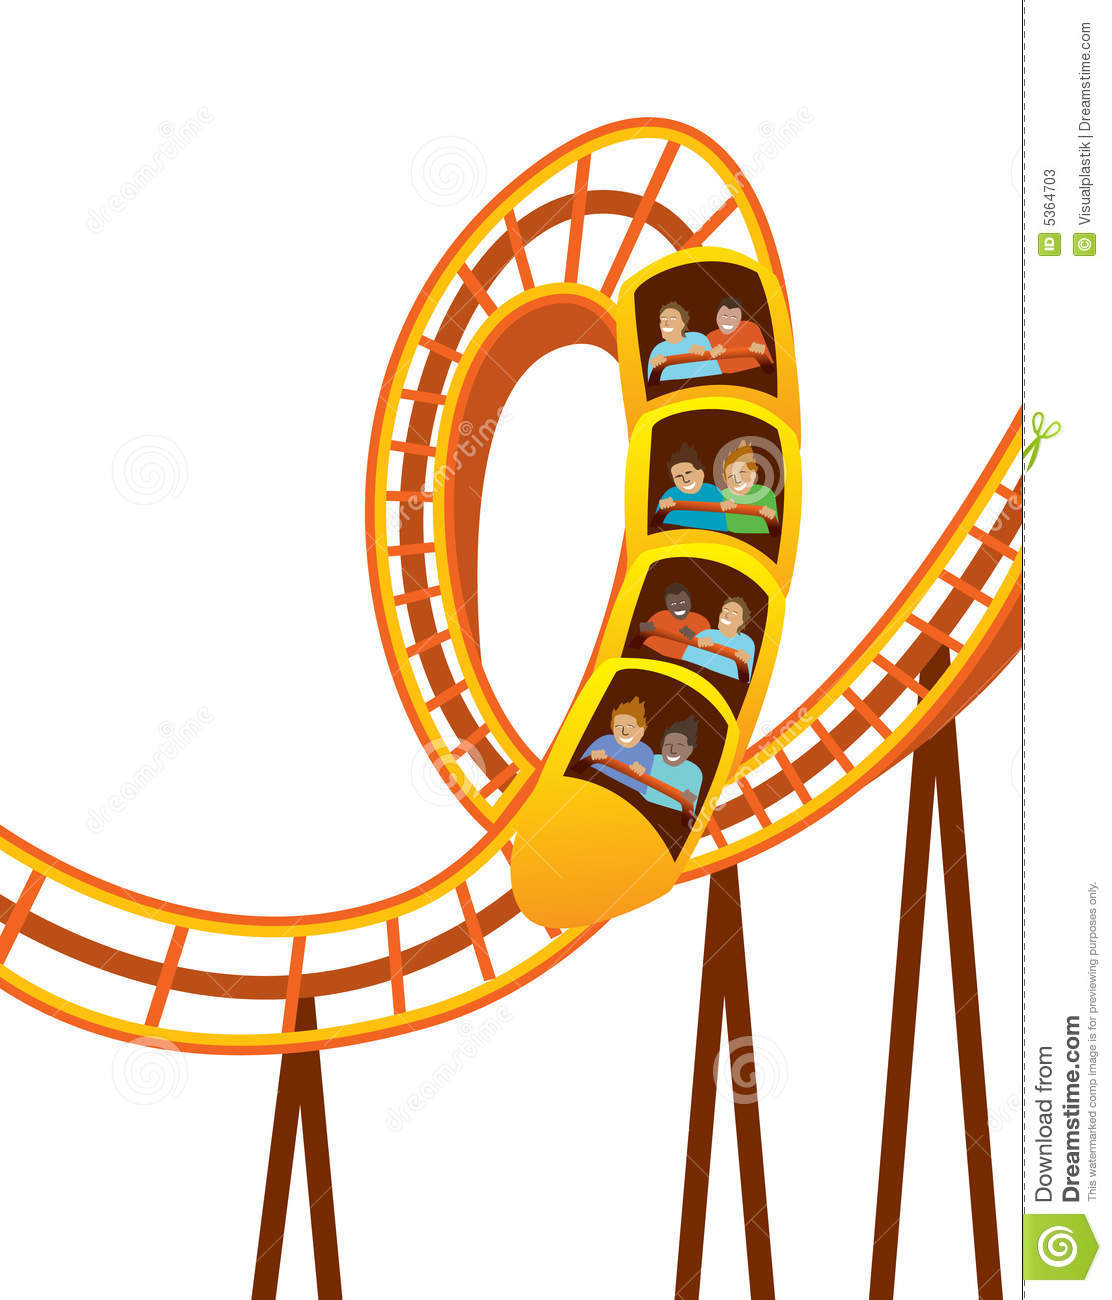 Roller coaster clipart free c